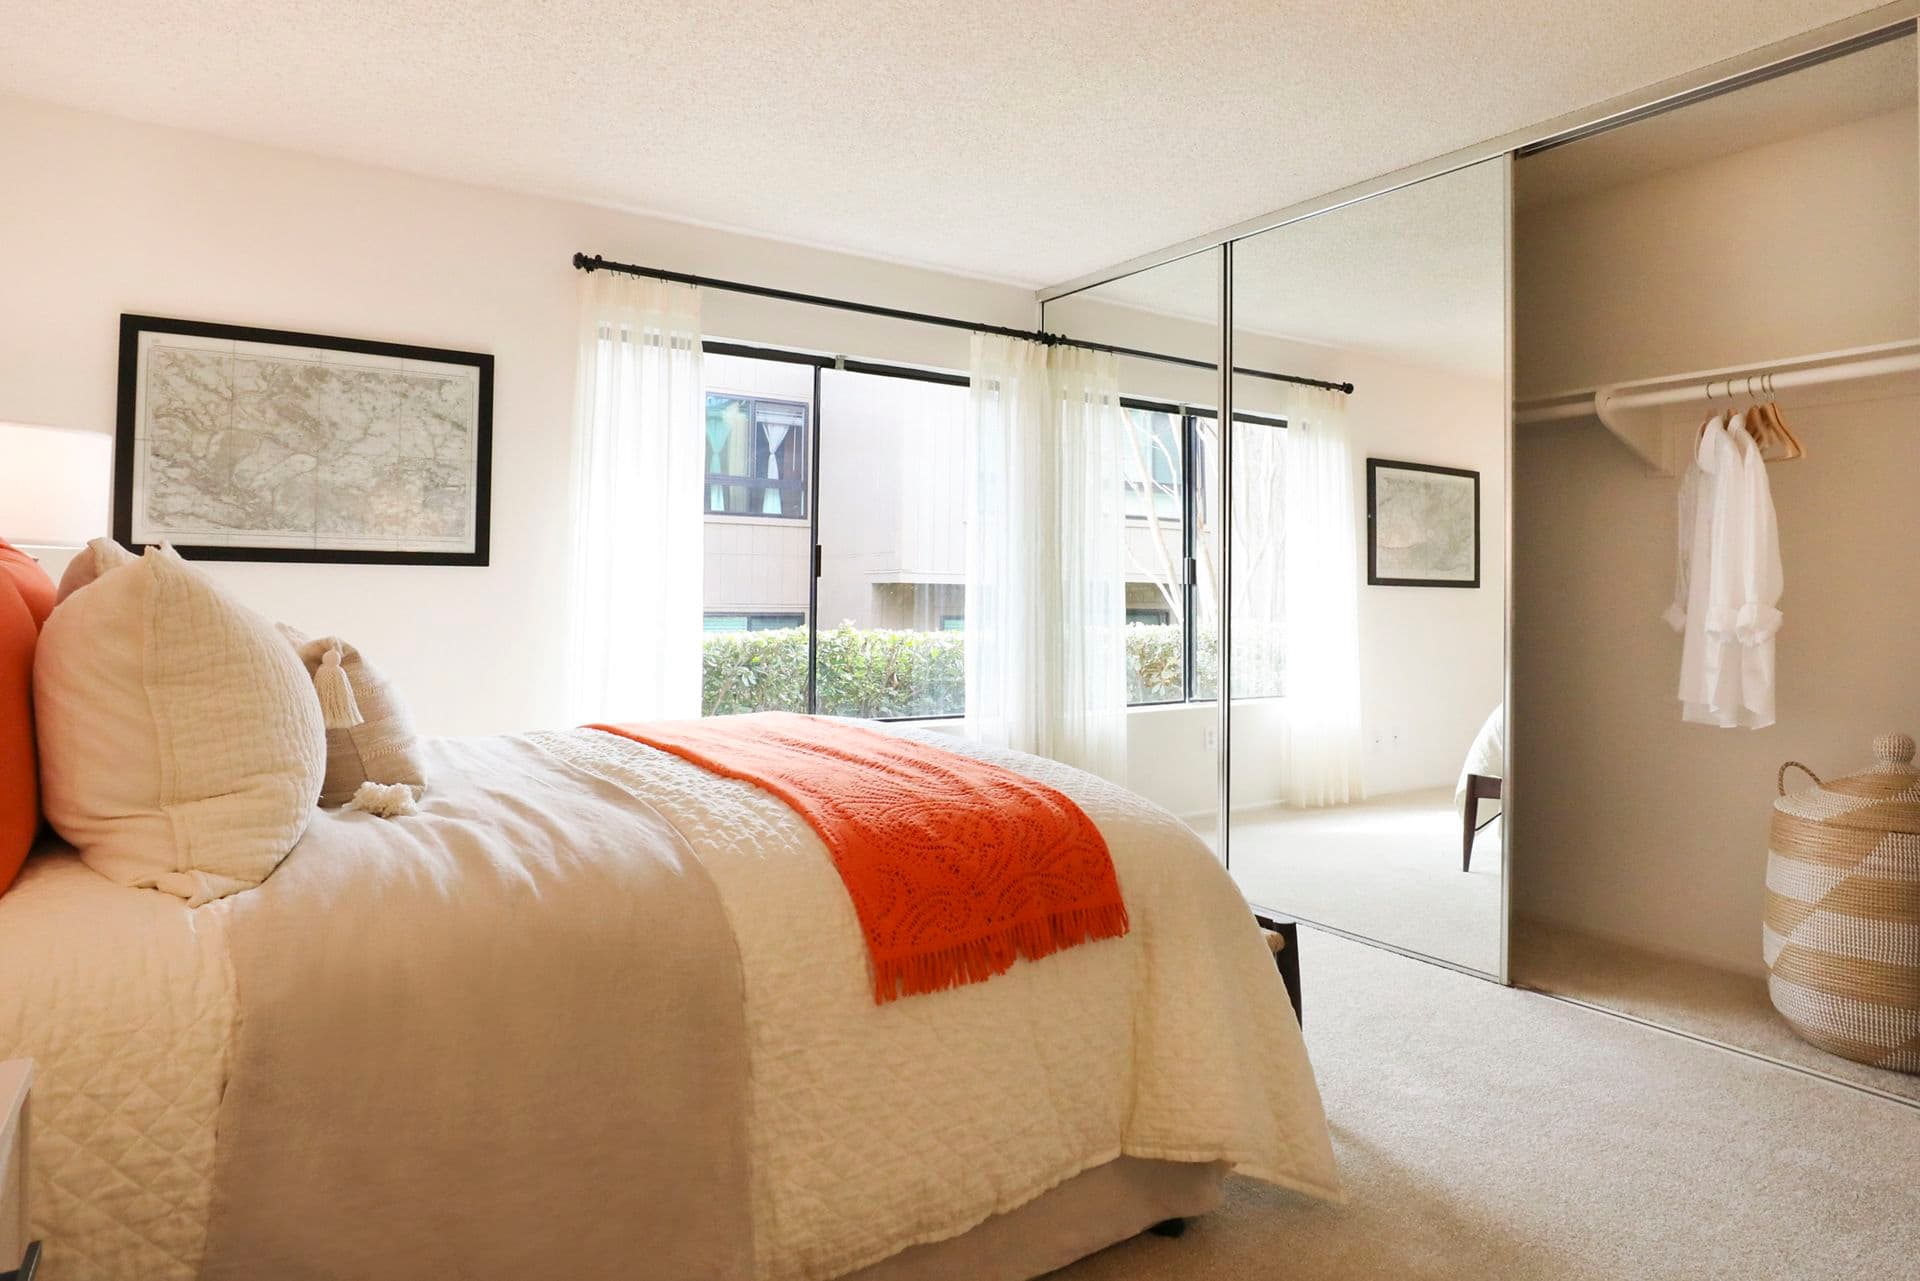 Interior view of bedroom at Baywood Apartment Homes in Newport Beach, CA.